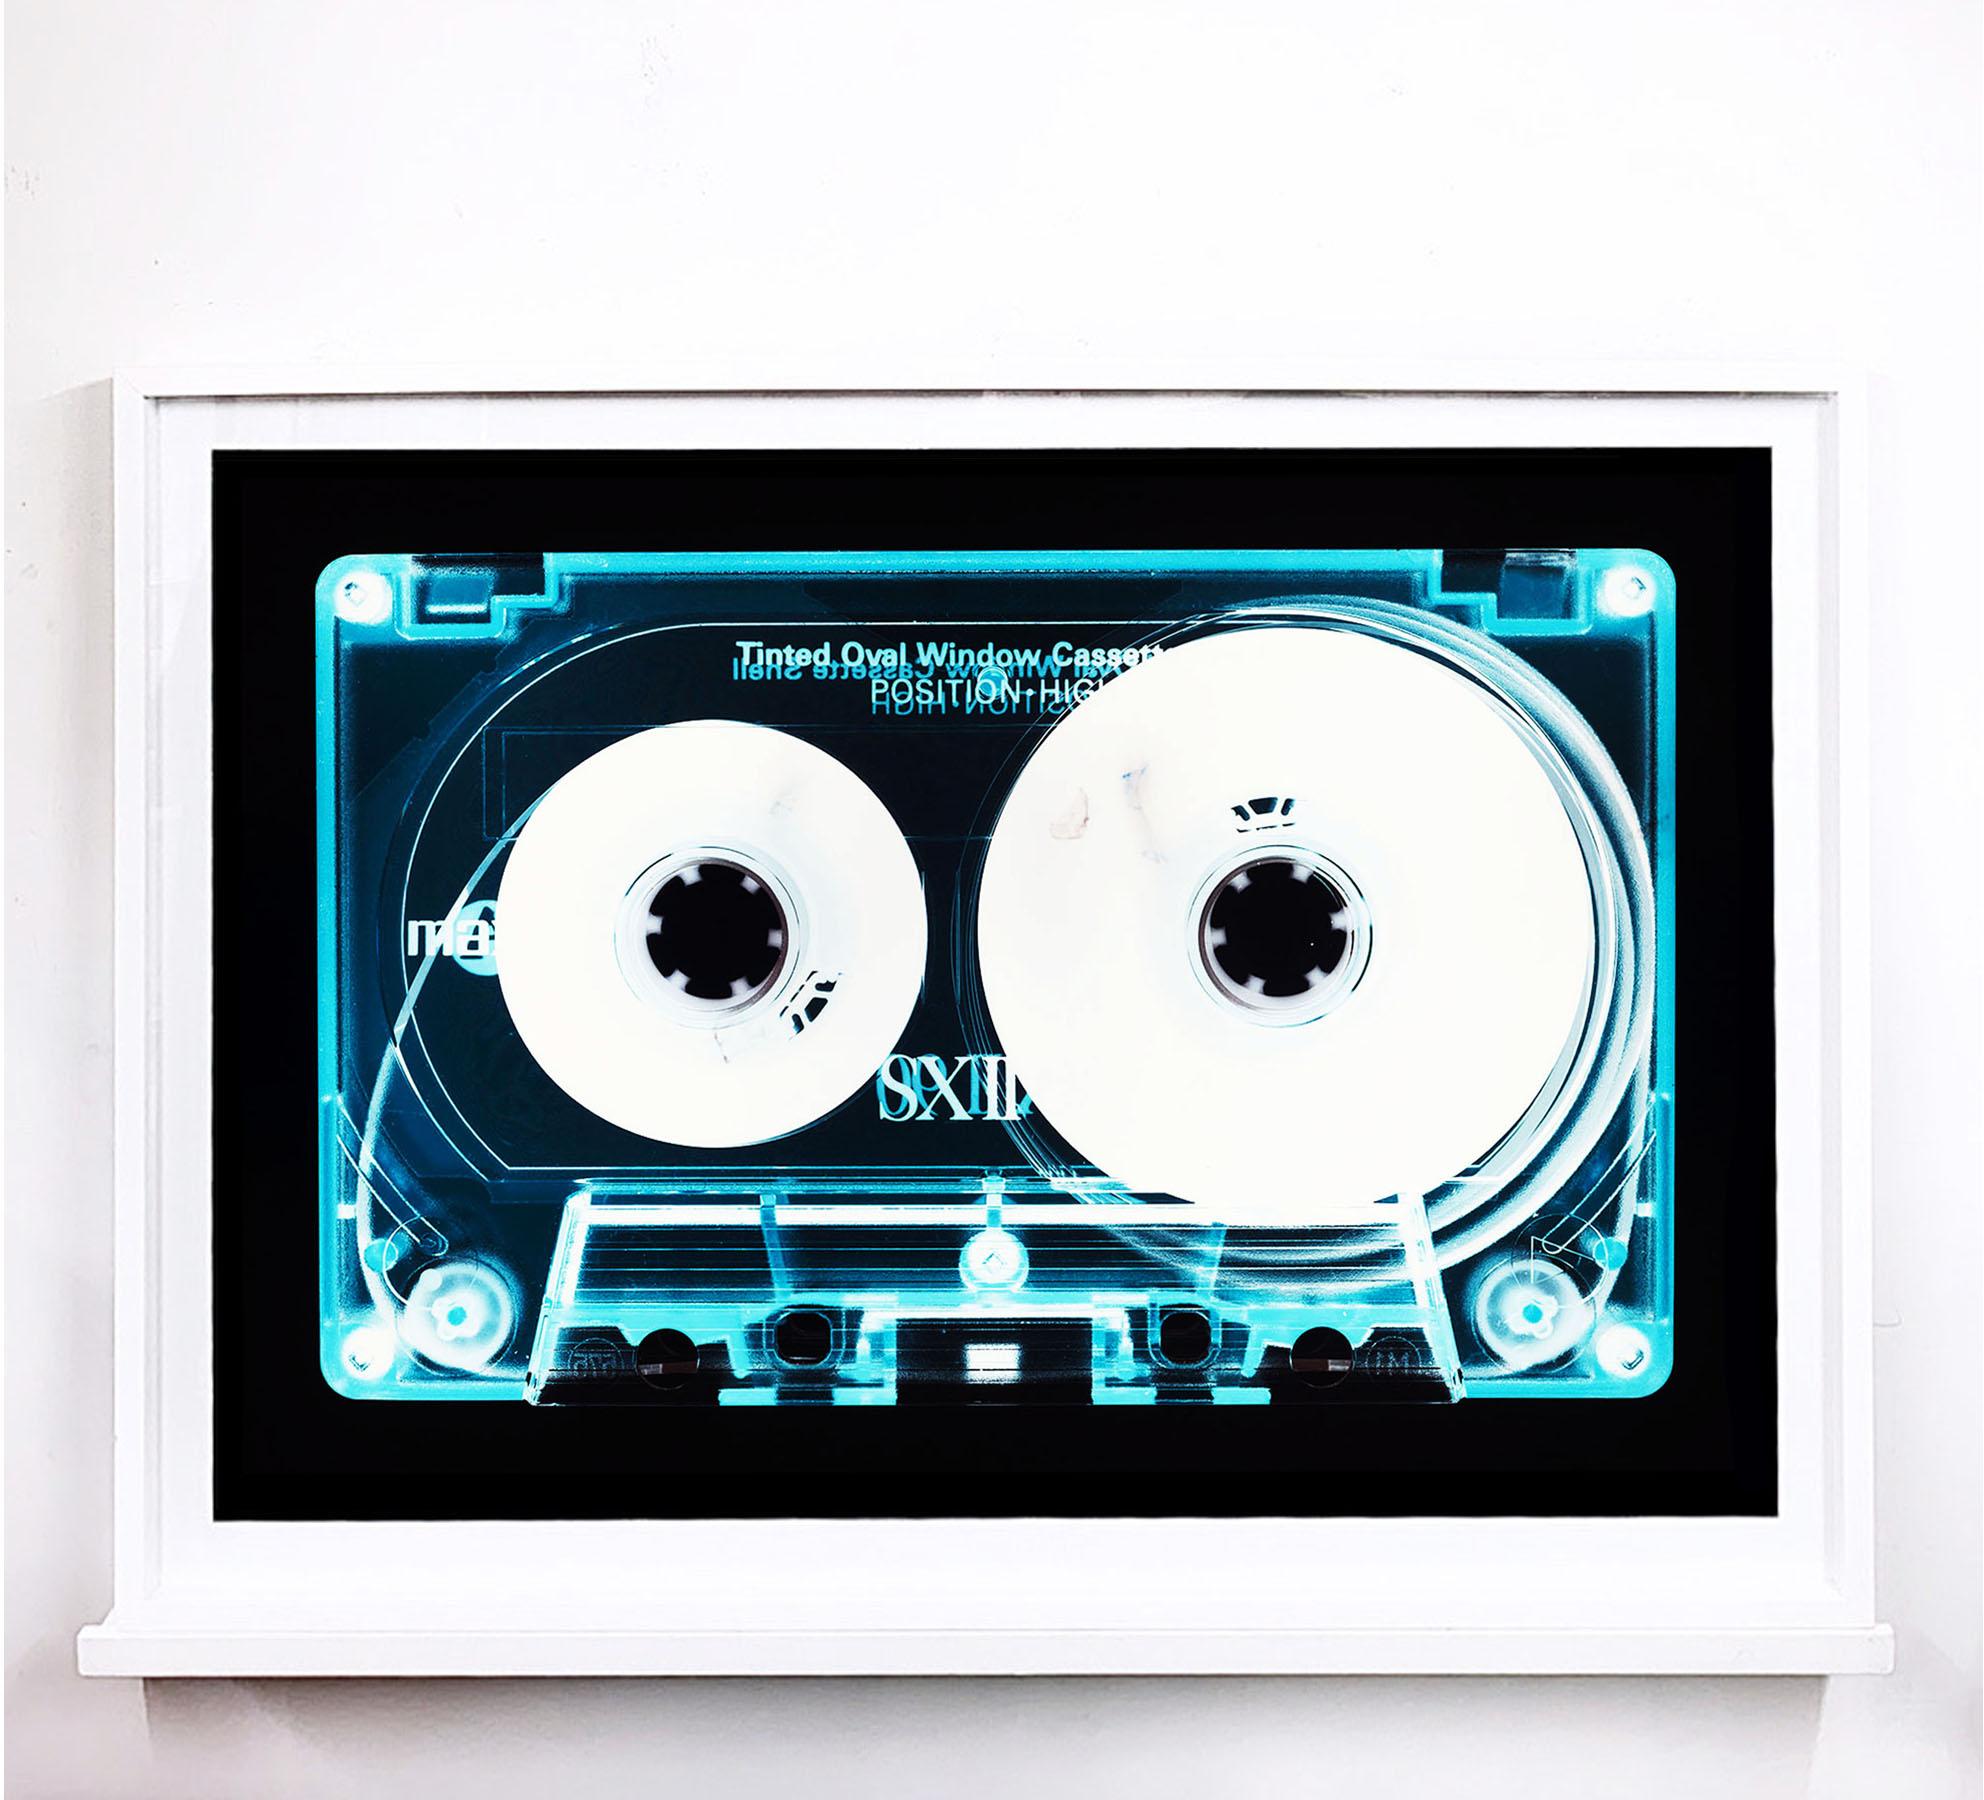 Tape Collection - Tinted Oval Window Cassette - Conceptual Color Music Art - Pop Art Photograph by Heidler & Heeps